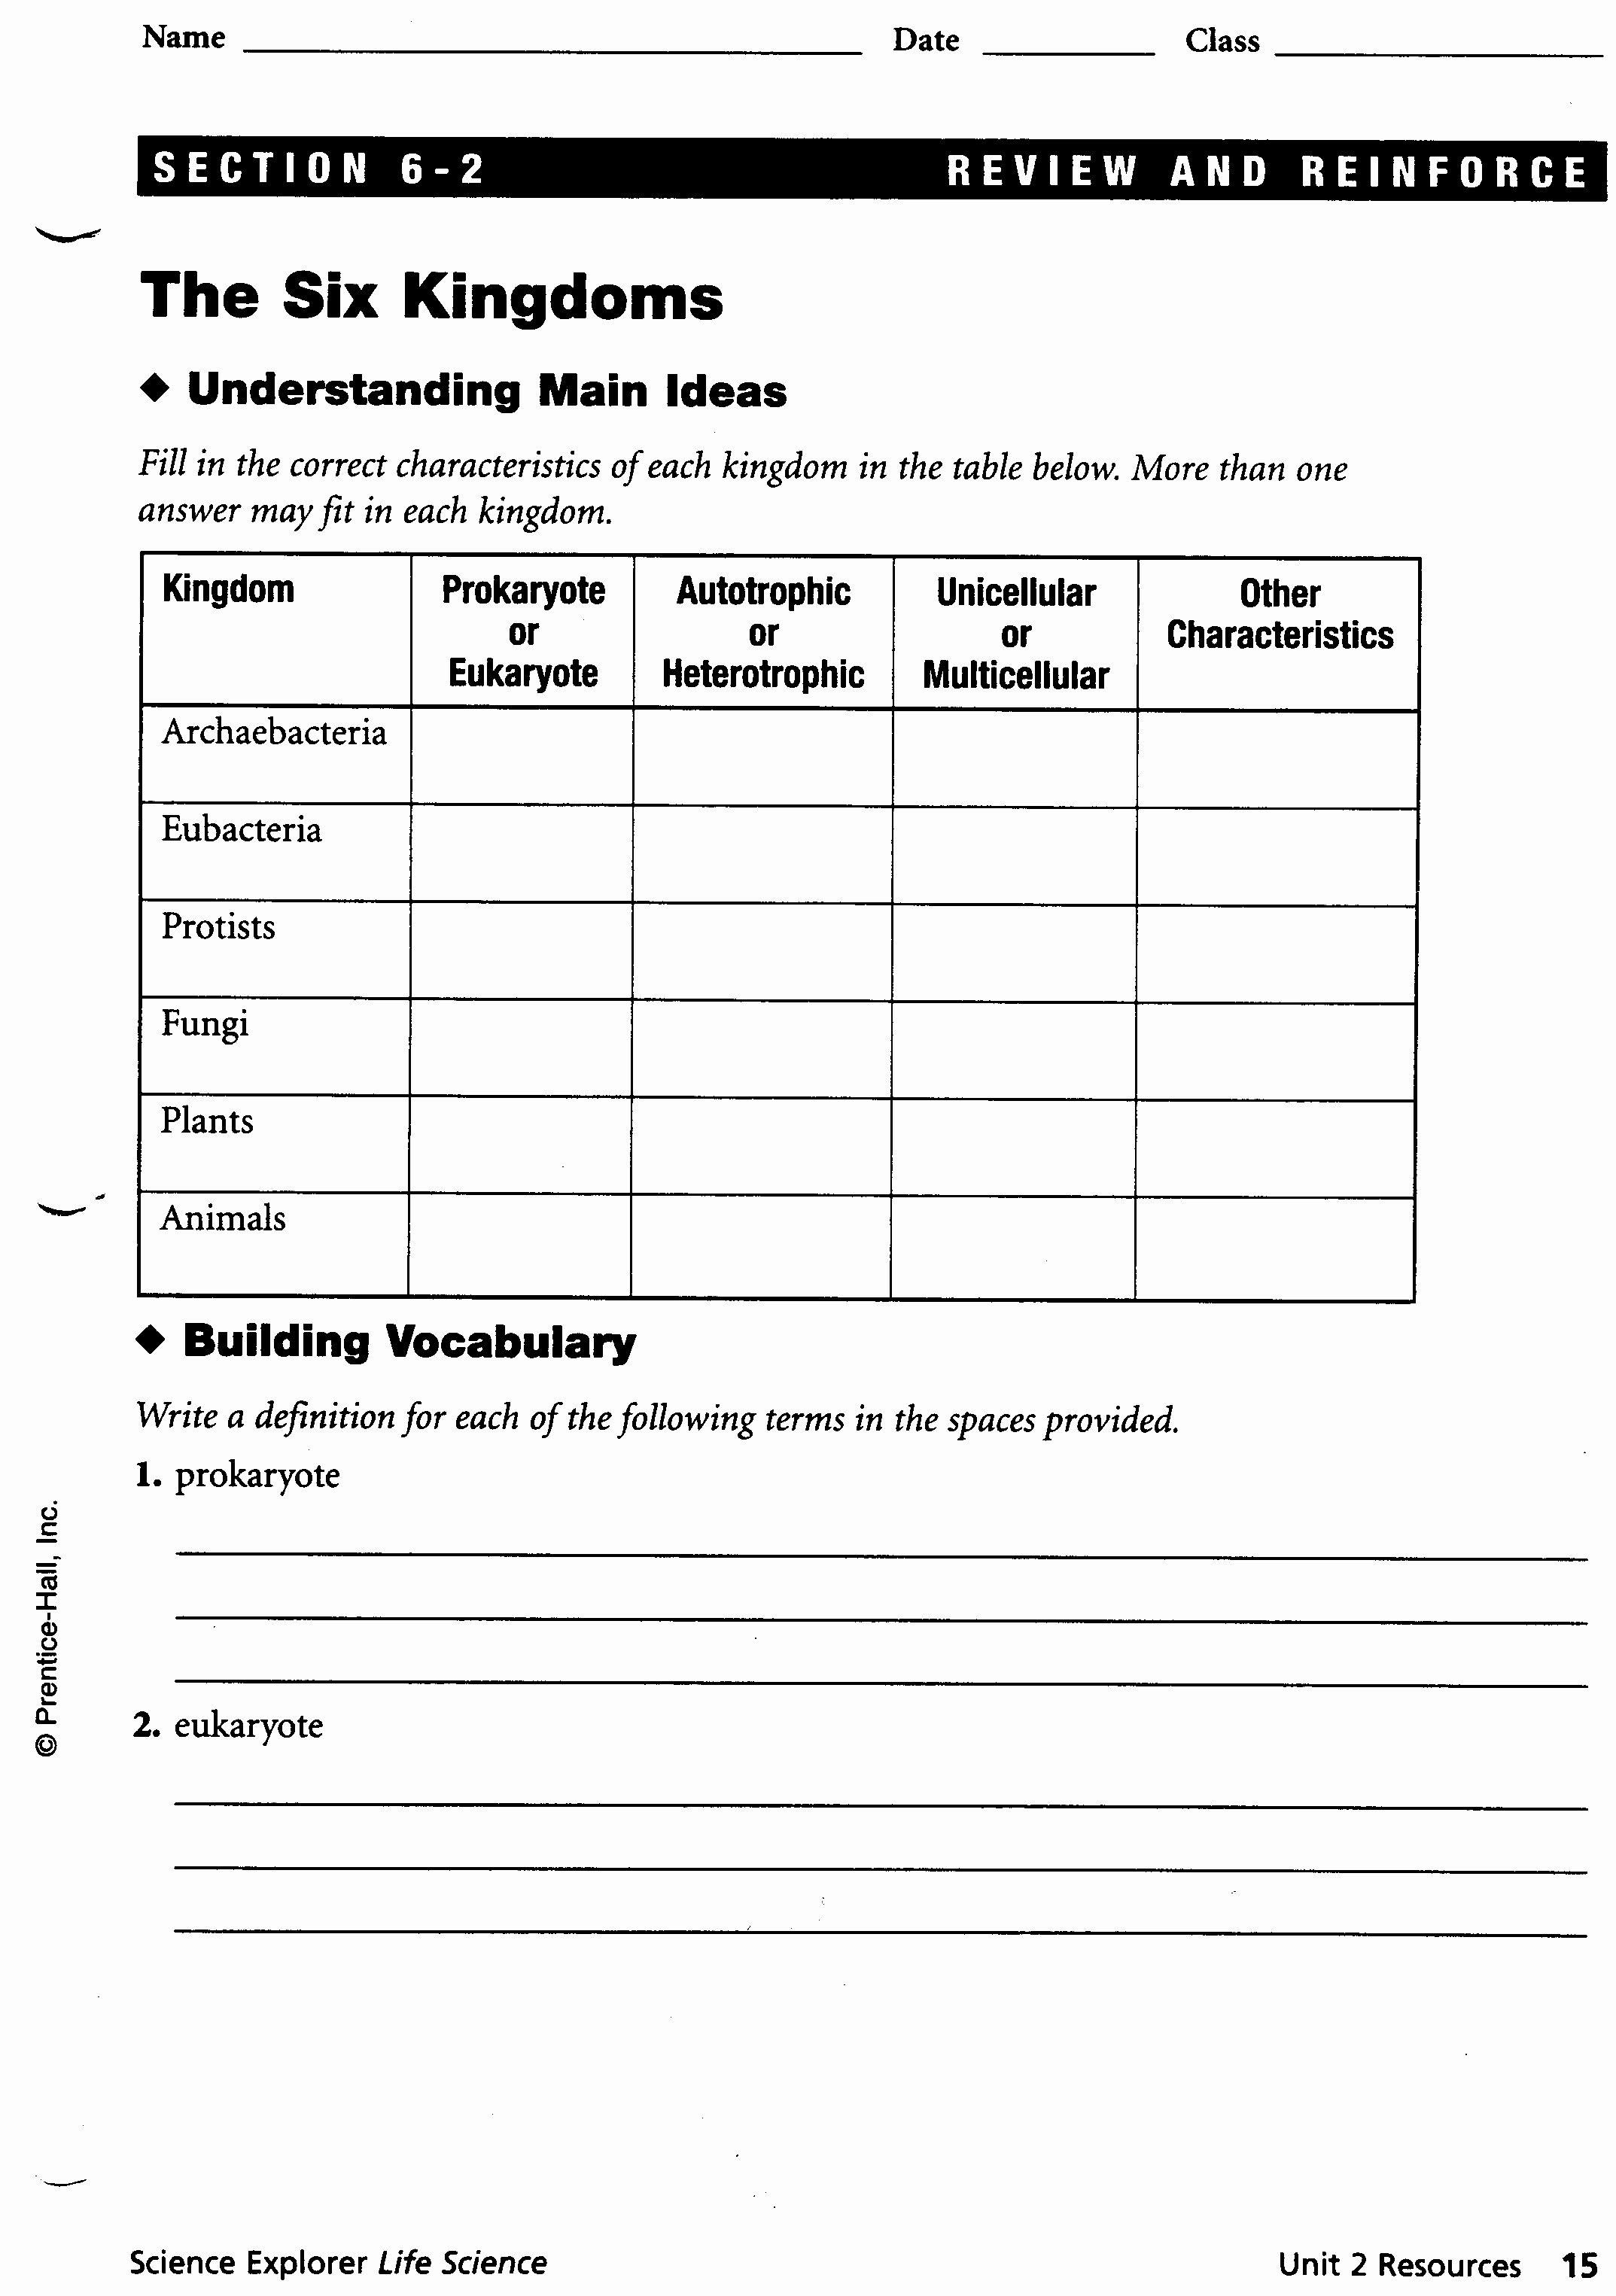 Biological Classification Worksheet Answers New Animal Kingdom Classification Worksheet